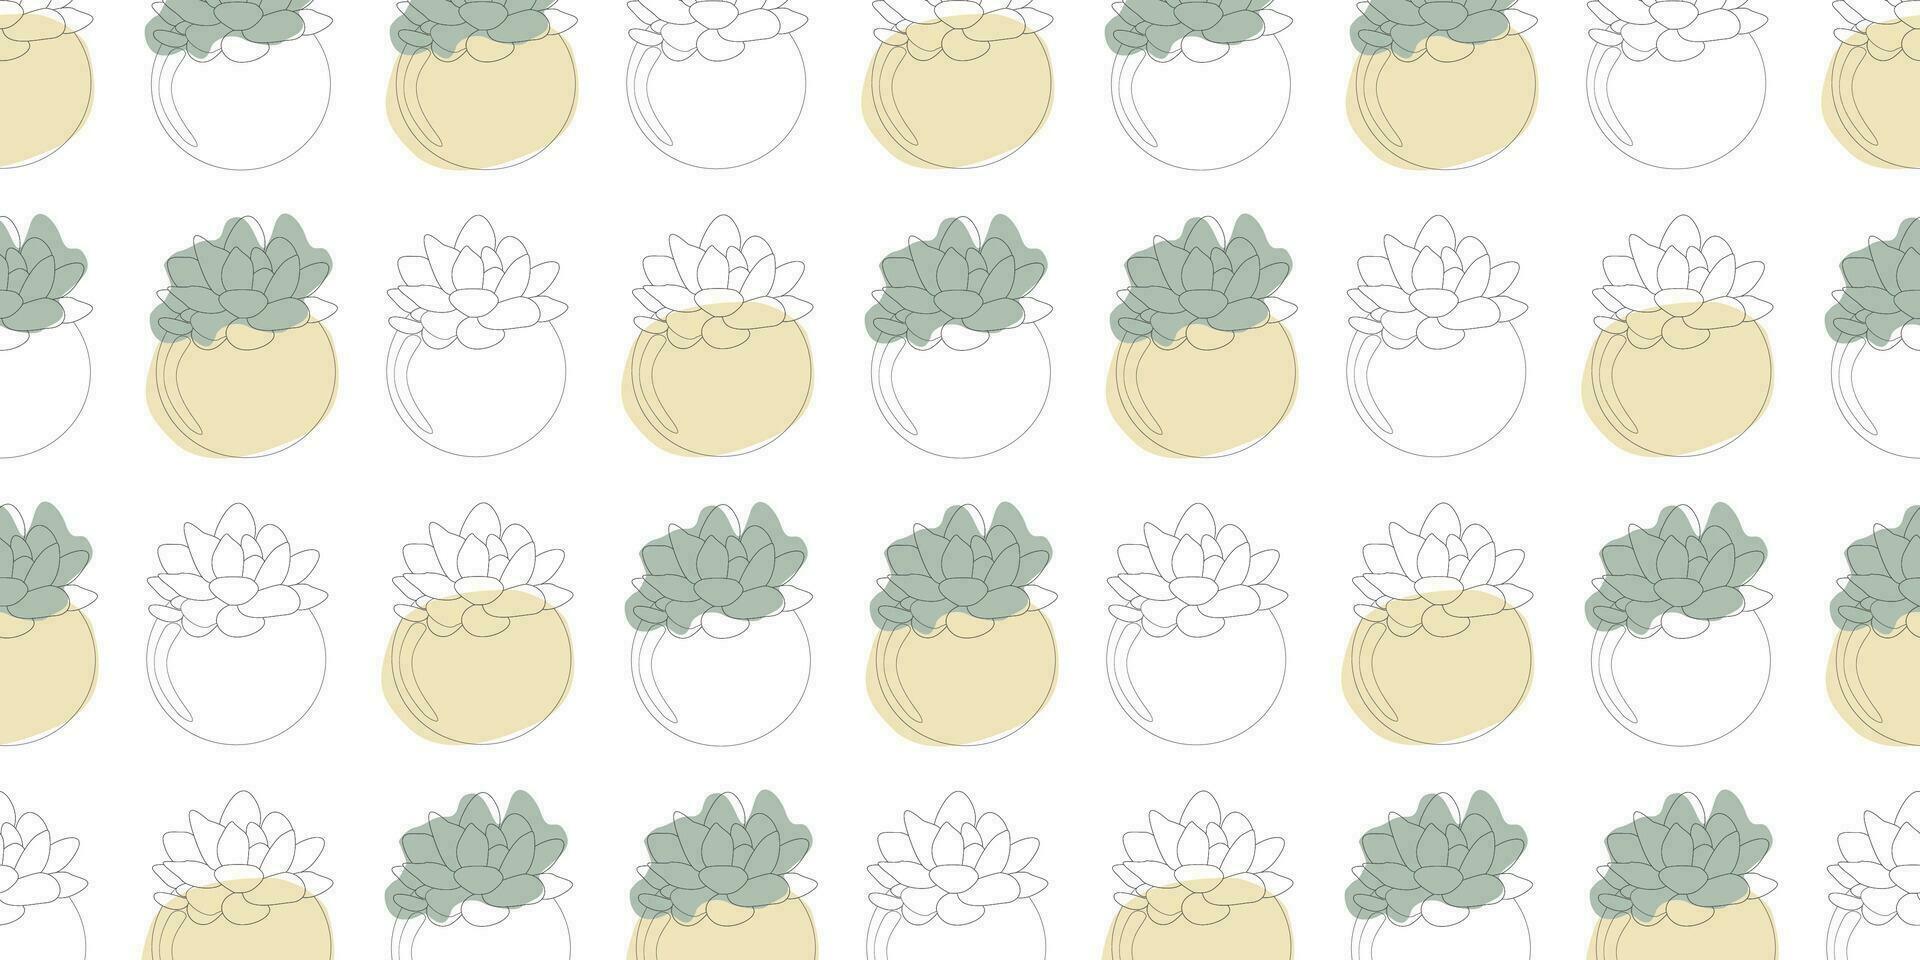 Succulent Seamless pattern Vector Line art illustration with Spots. Cute Plant in Flower pot. Mexican house Botany. Natural fun home decor element. Template for Textile, Fabric, Wrapping paper.